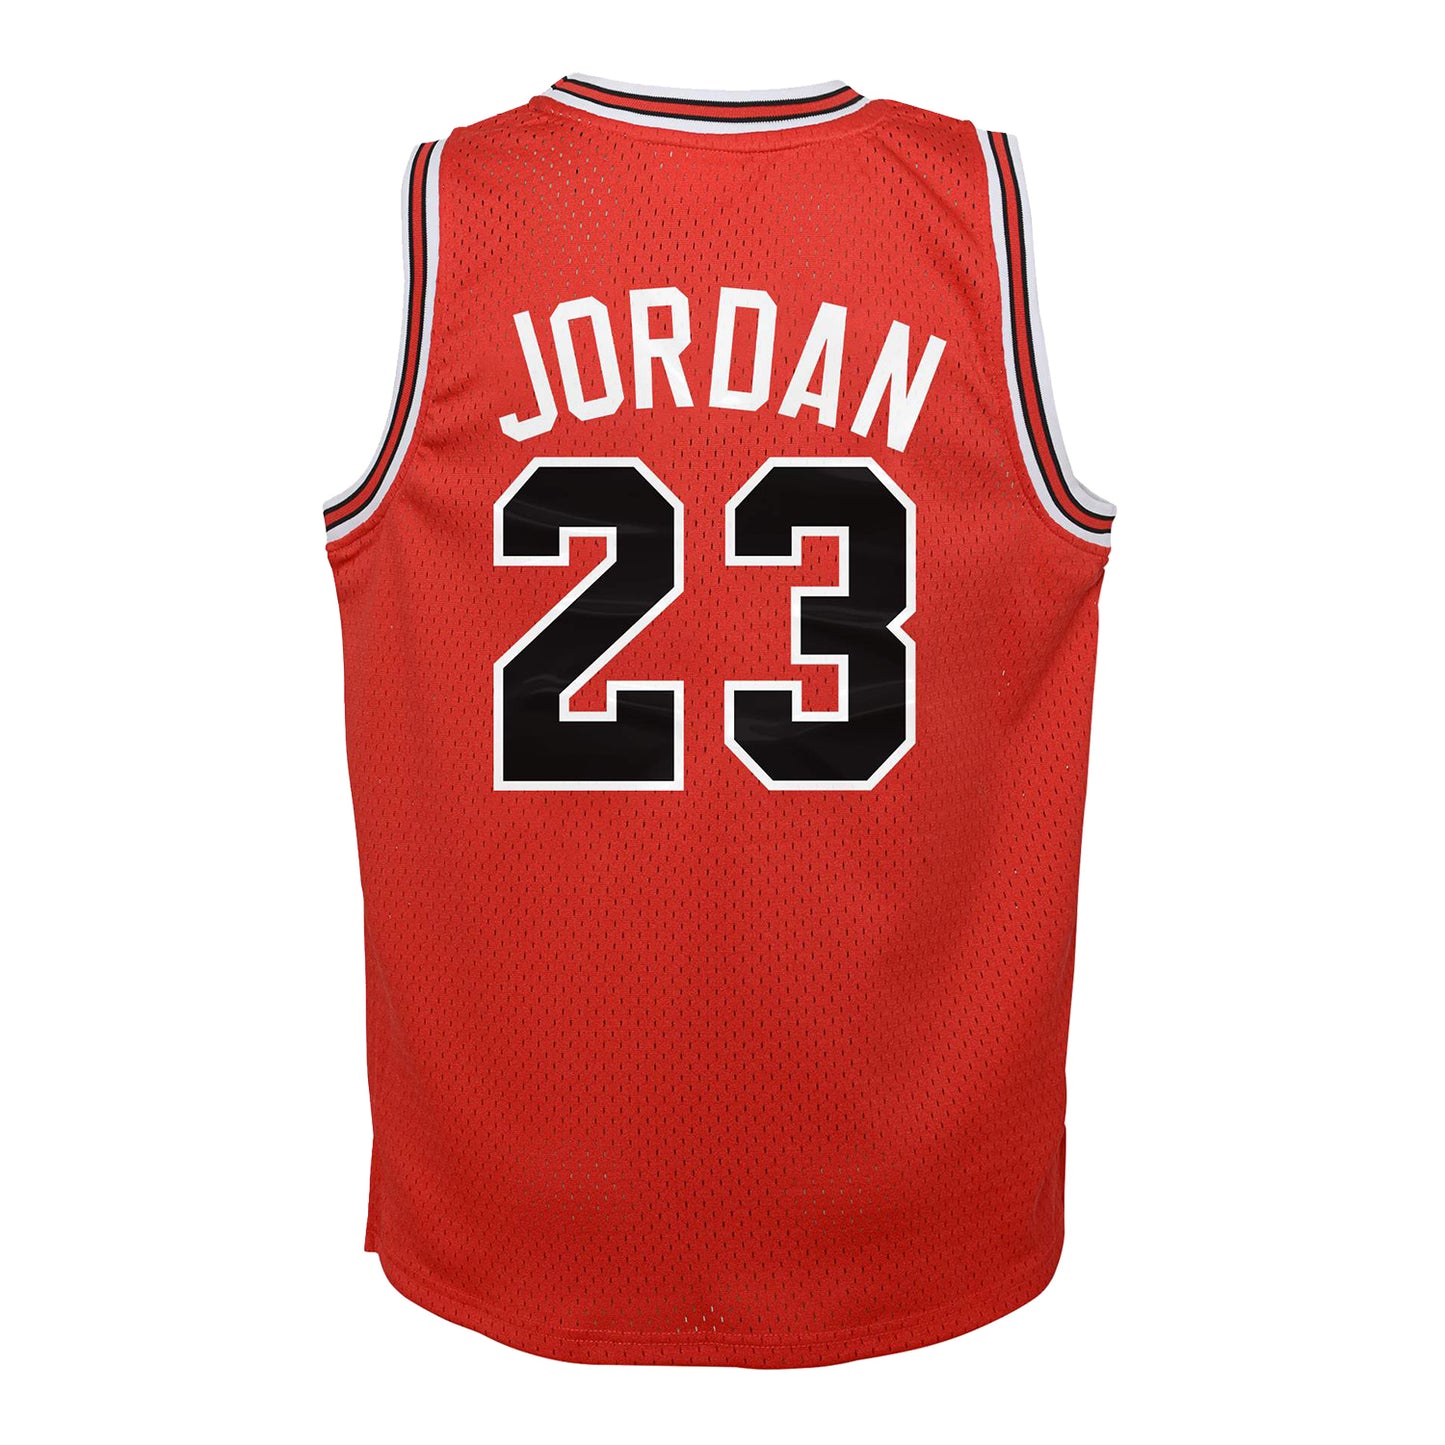 Youth Chicago Bulls Authentic Mitchell & Ness Michael Jordan 1984-85 Jersey in red - back view